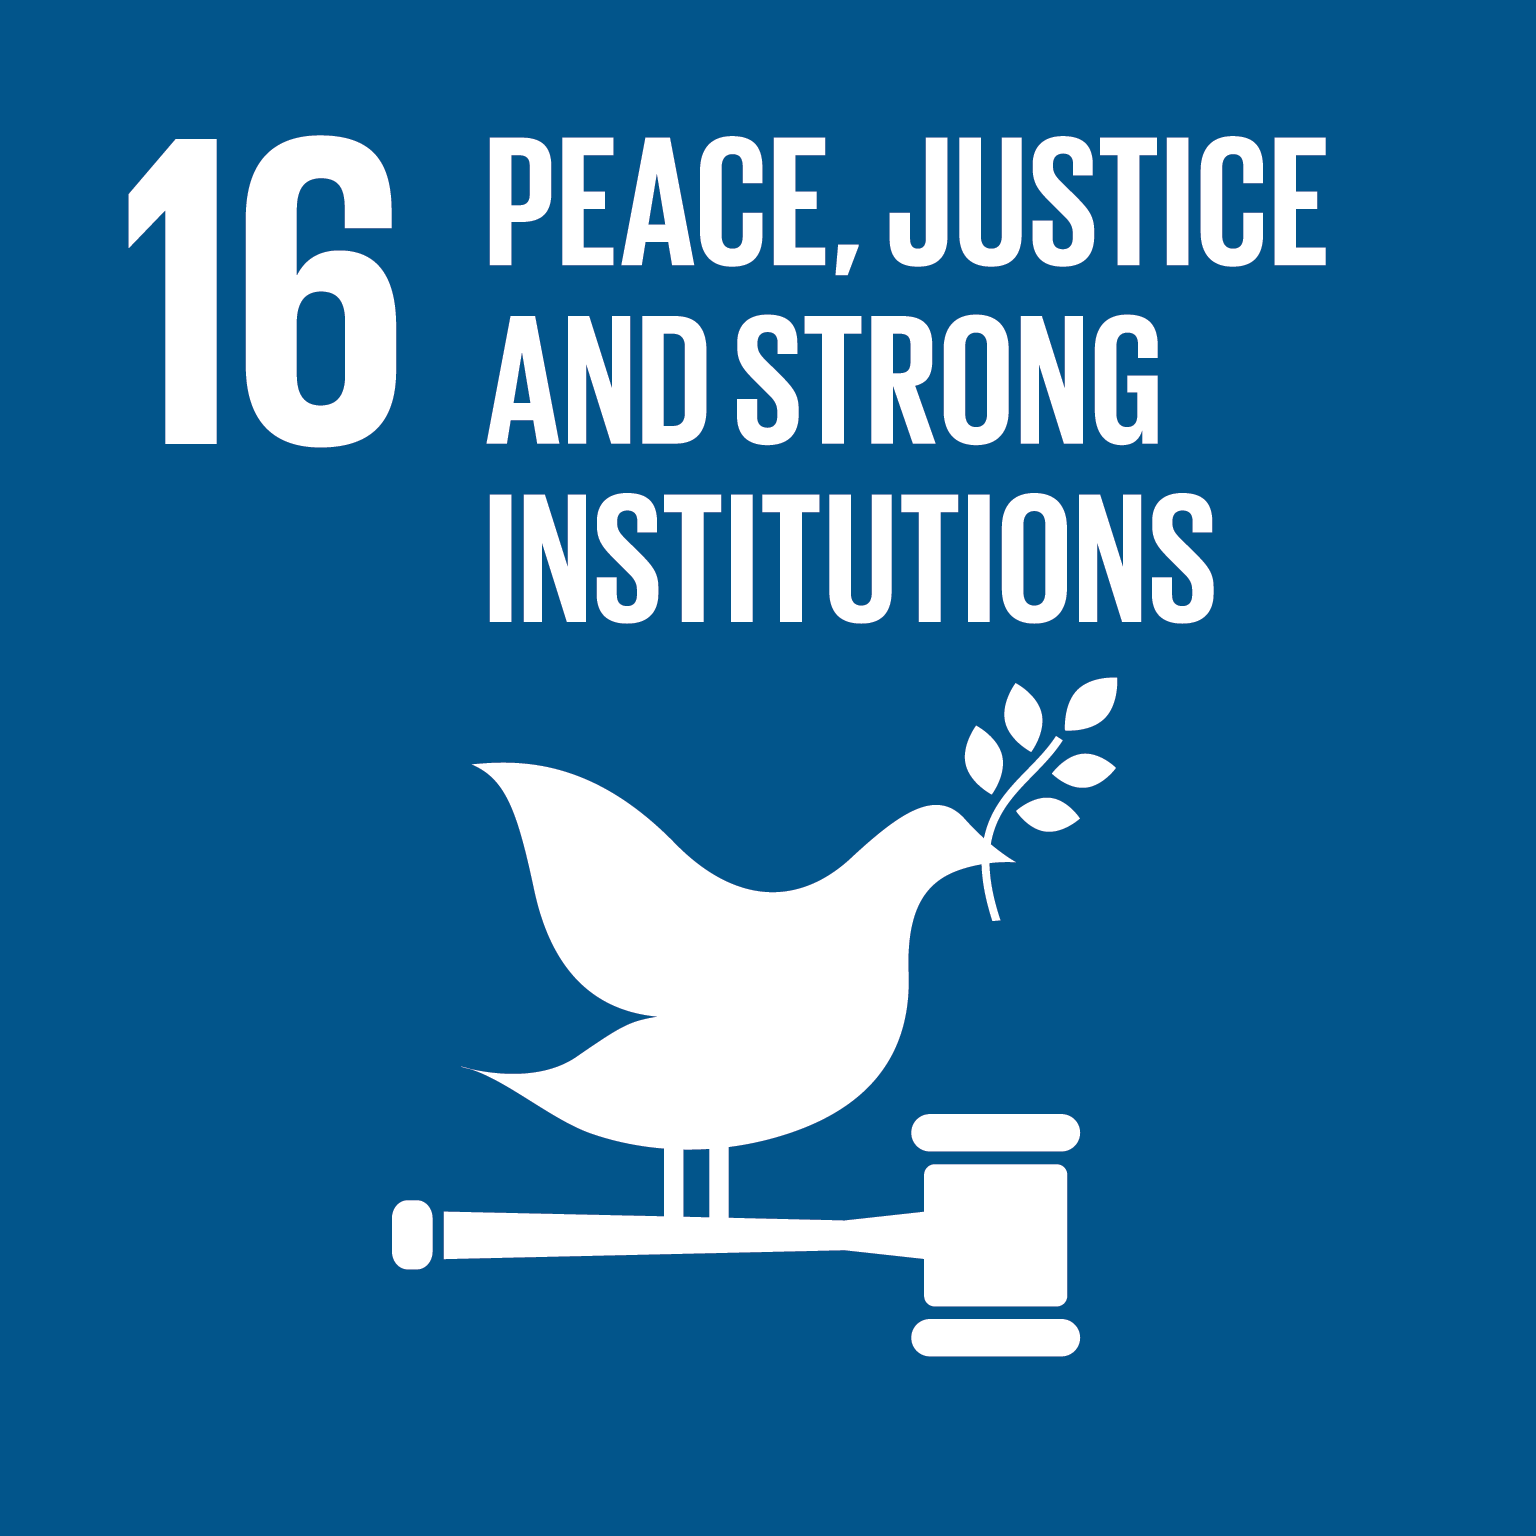 SDG16: Peace, Justice and Strong Institutions